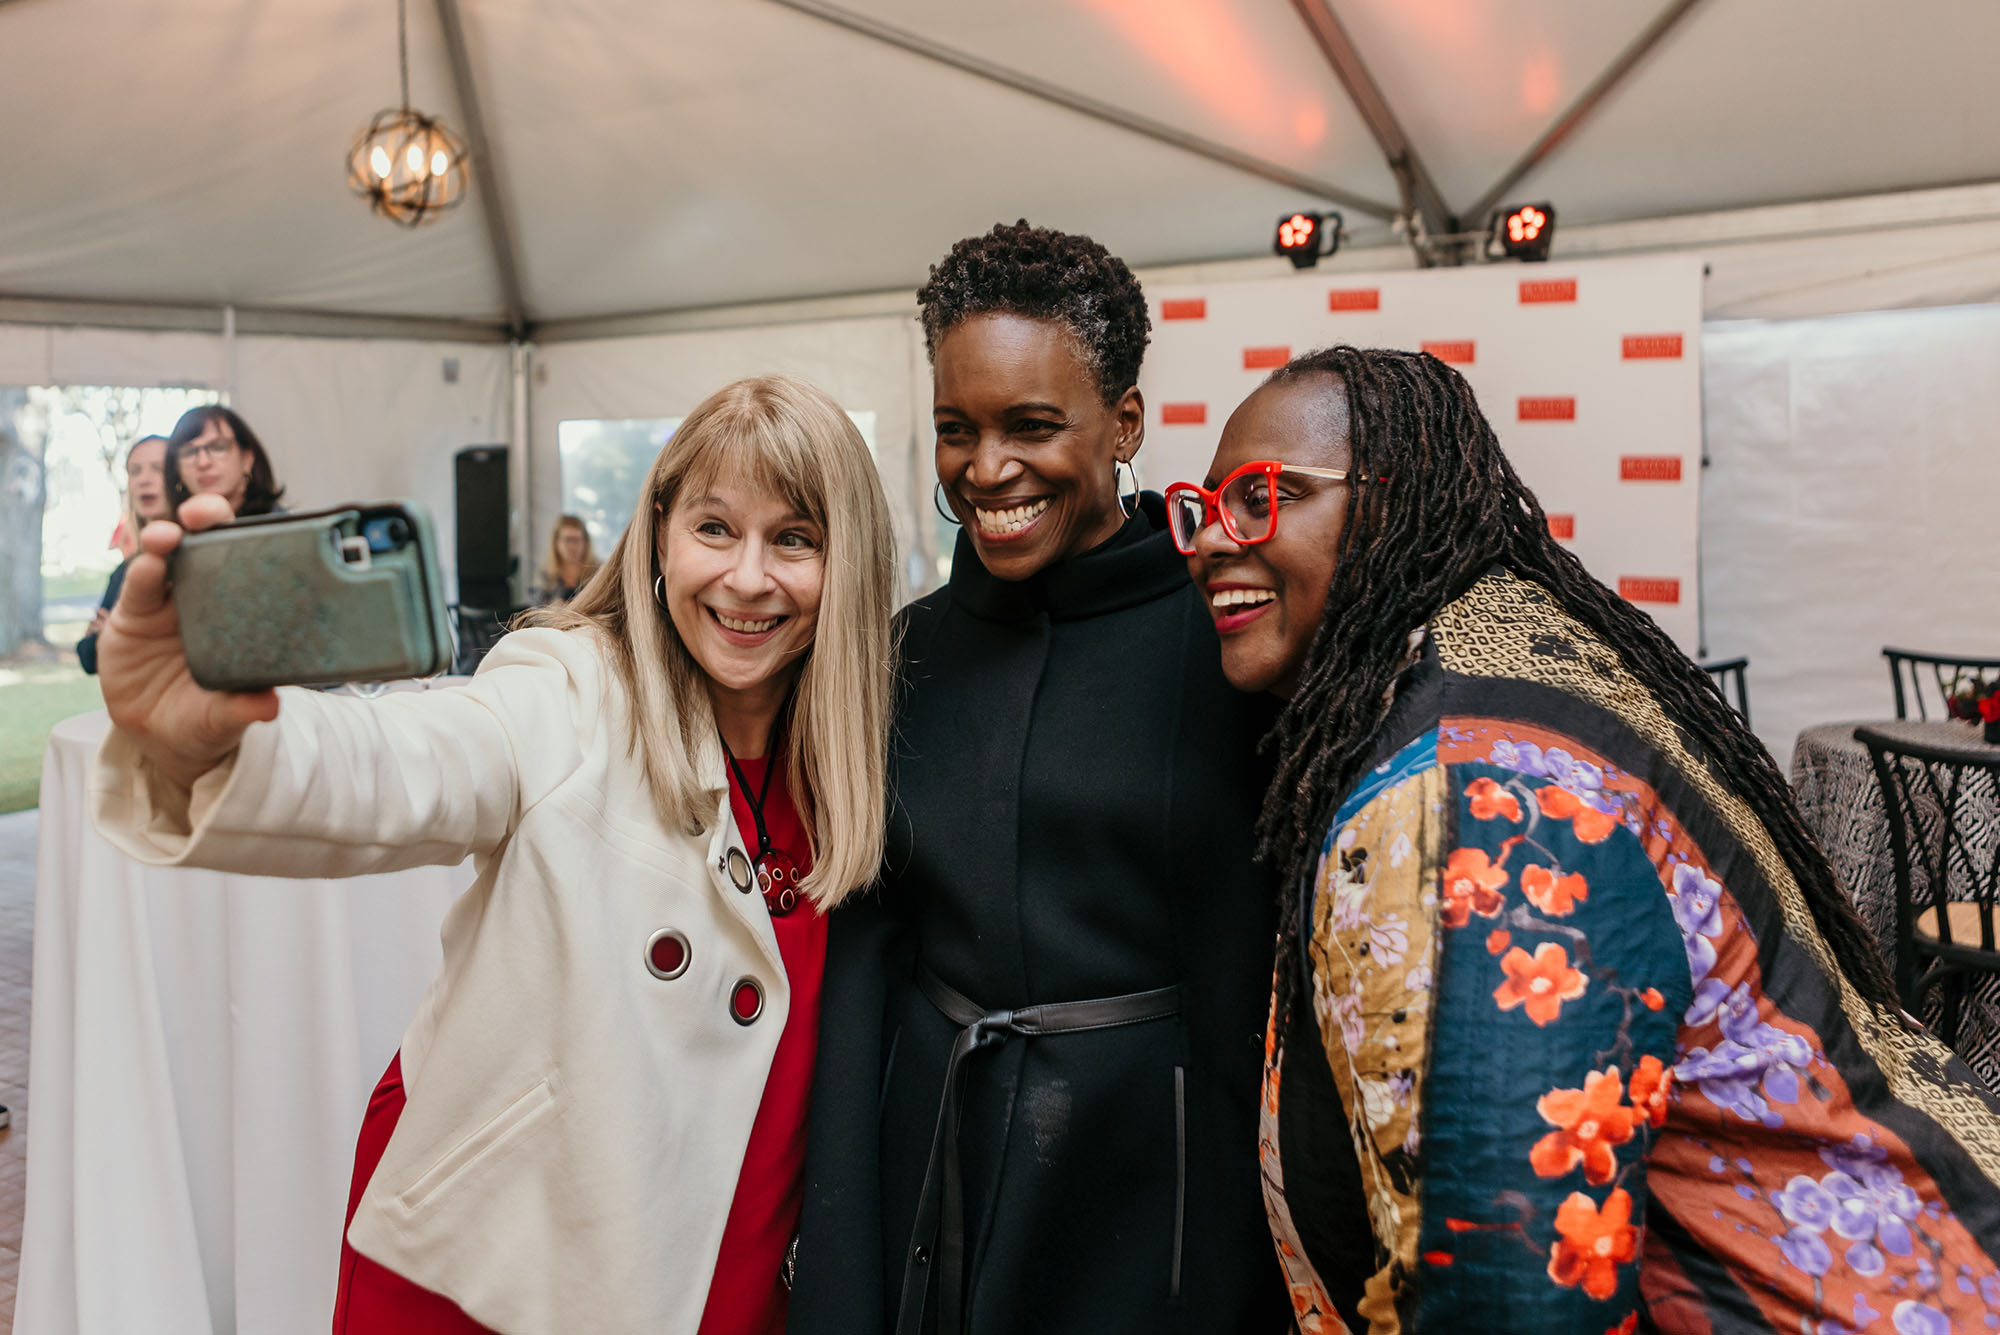 Photo: Barbara Jones, a white woman with blonde hair and wearing a red blouse and white blazer (left), and Angela Onwuachi-Willig, a Black woman with long dreadlocks wearing red glasses and a colorful, patterned long-sleeved top, (right), pose for a selfie with Melissa Gilliam (center), a Black woman wearing a black jacket and pants.